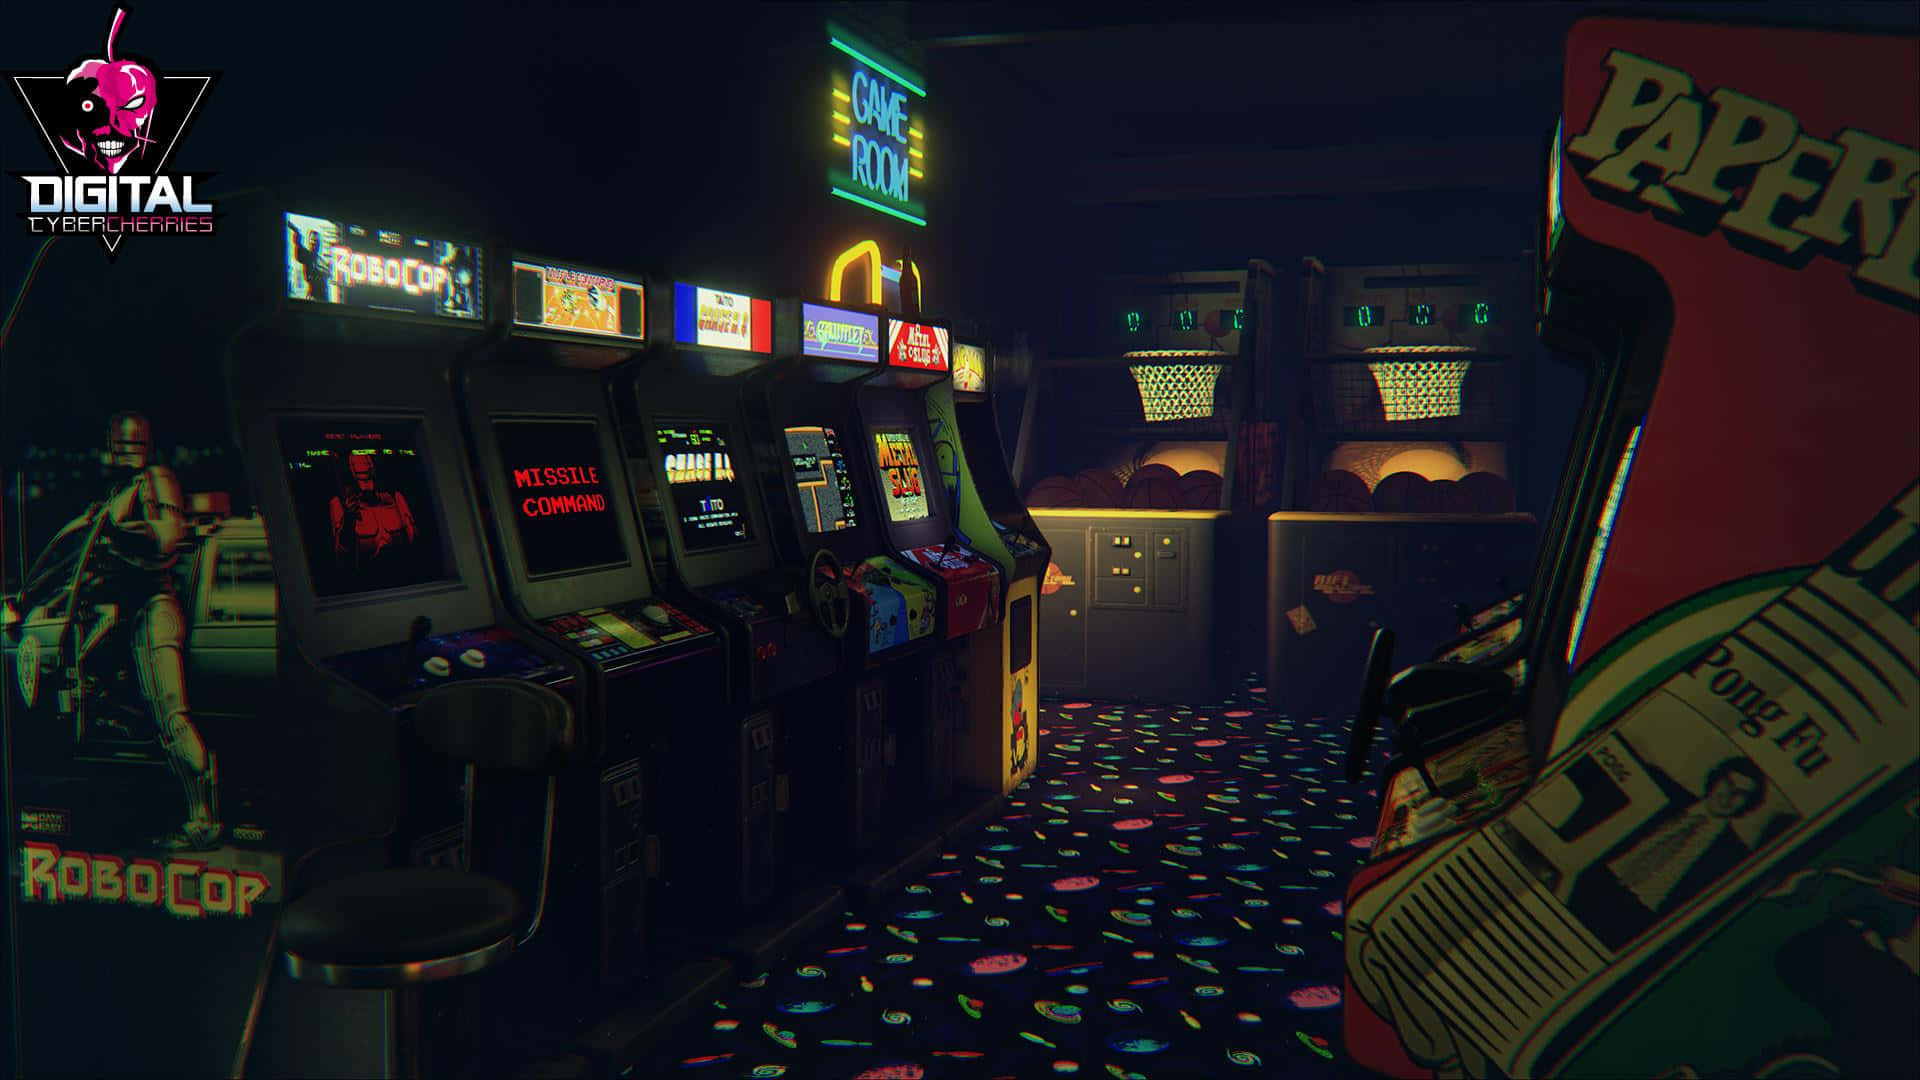 A Video Game Room With Several Arcade Machines